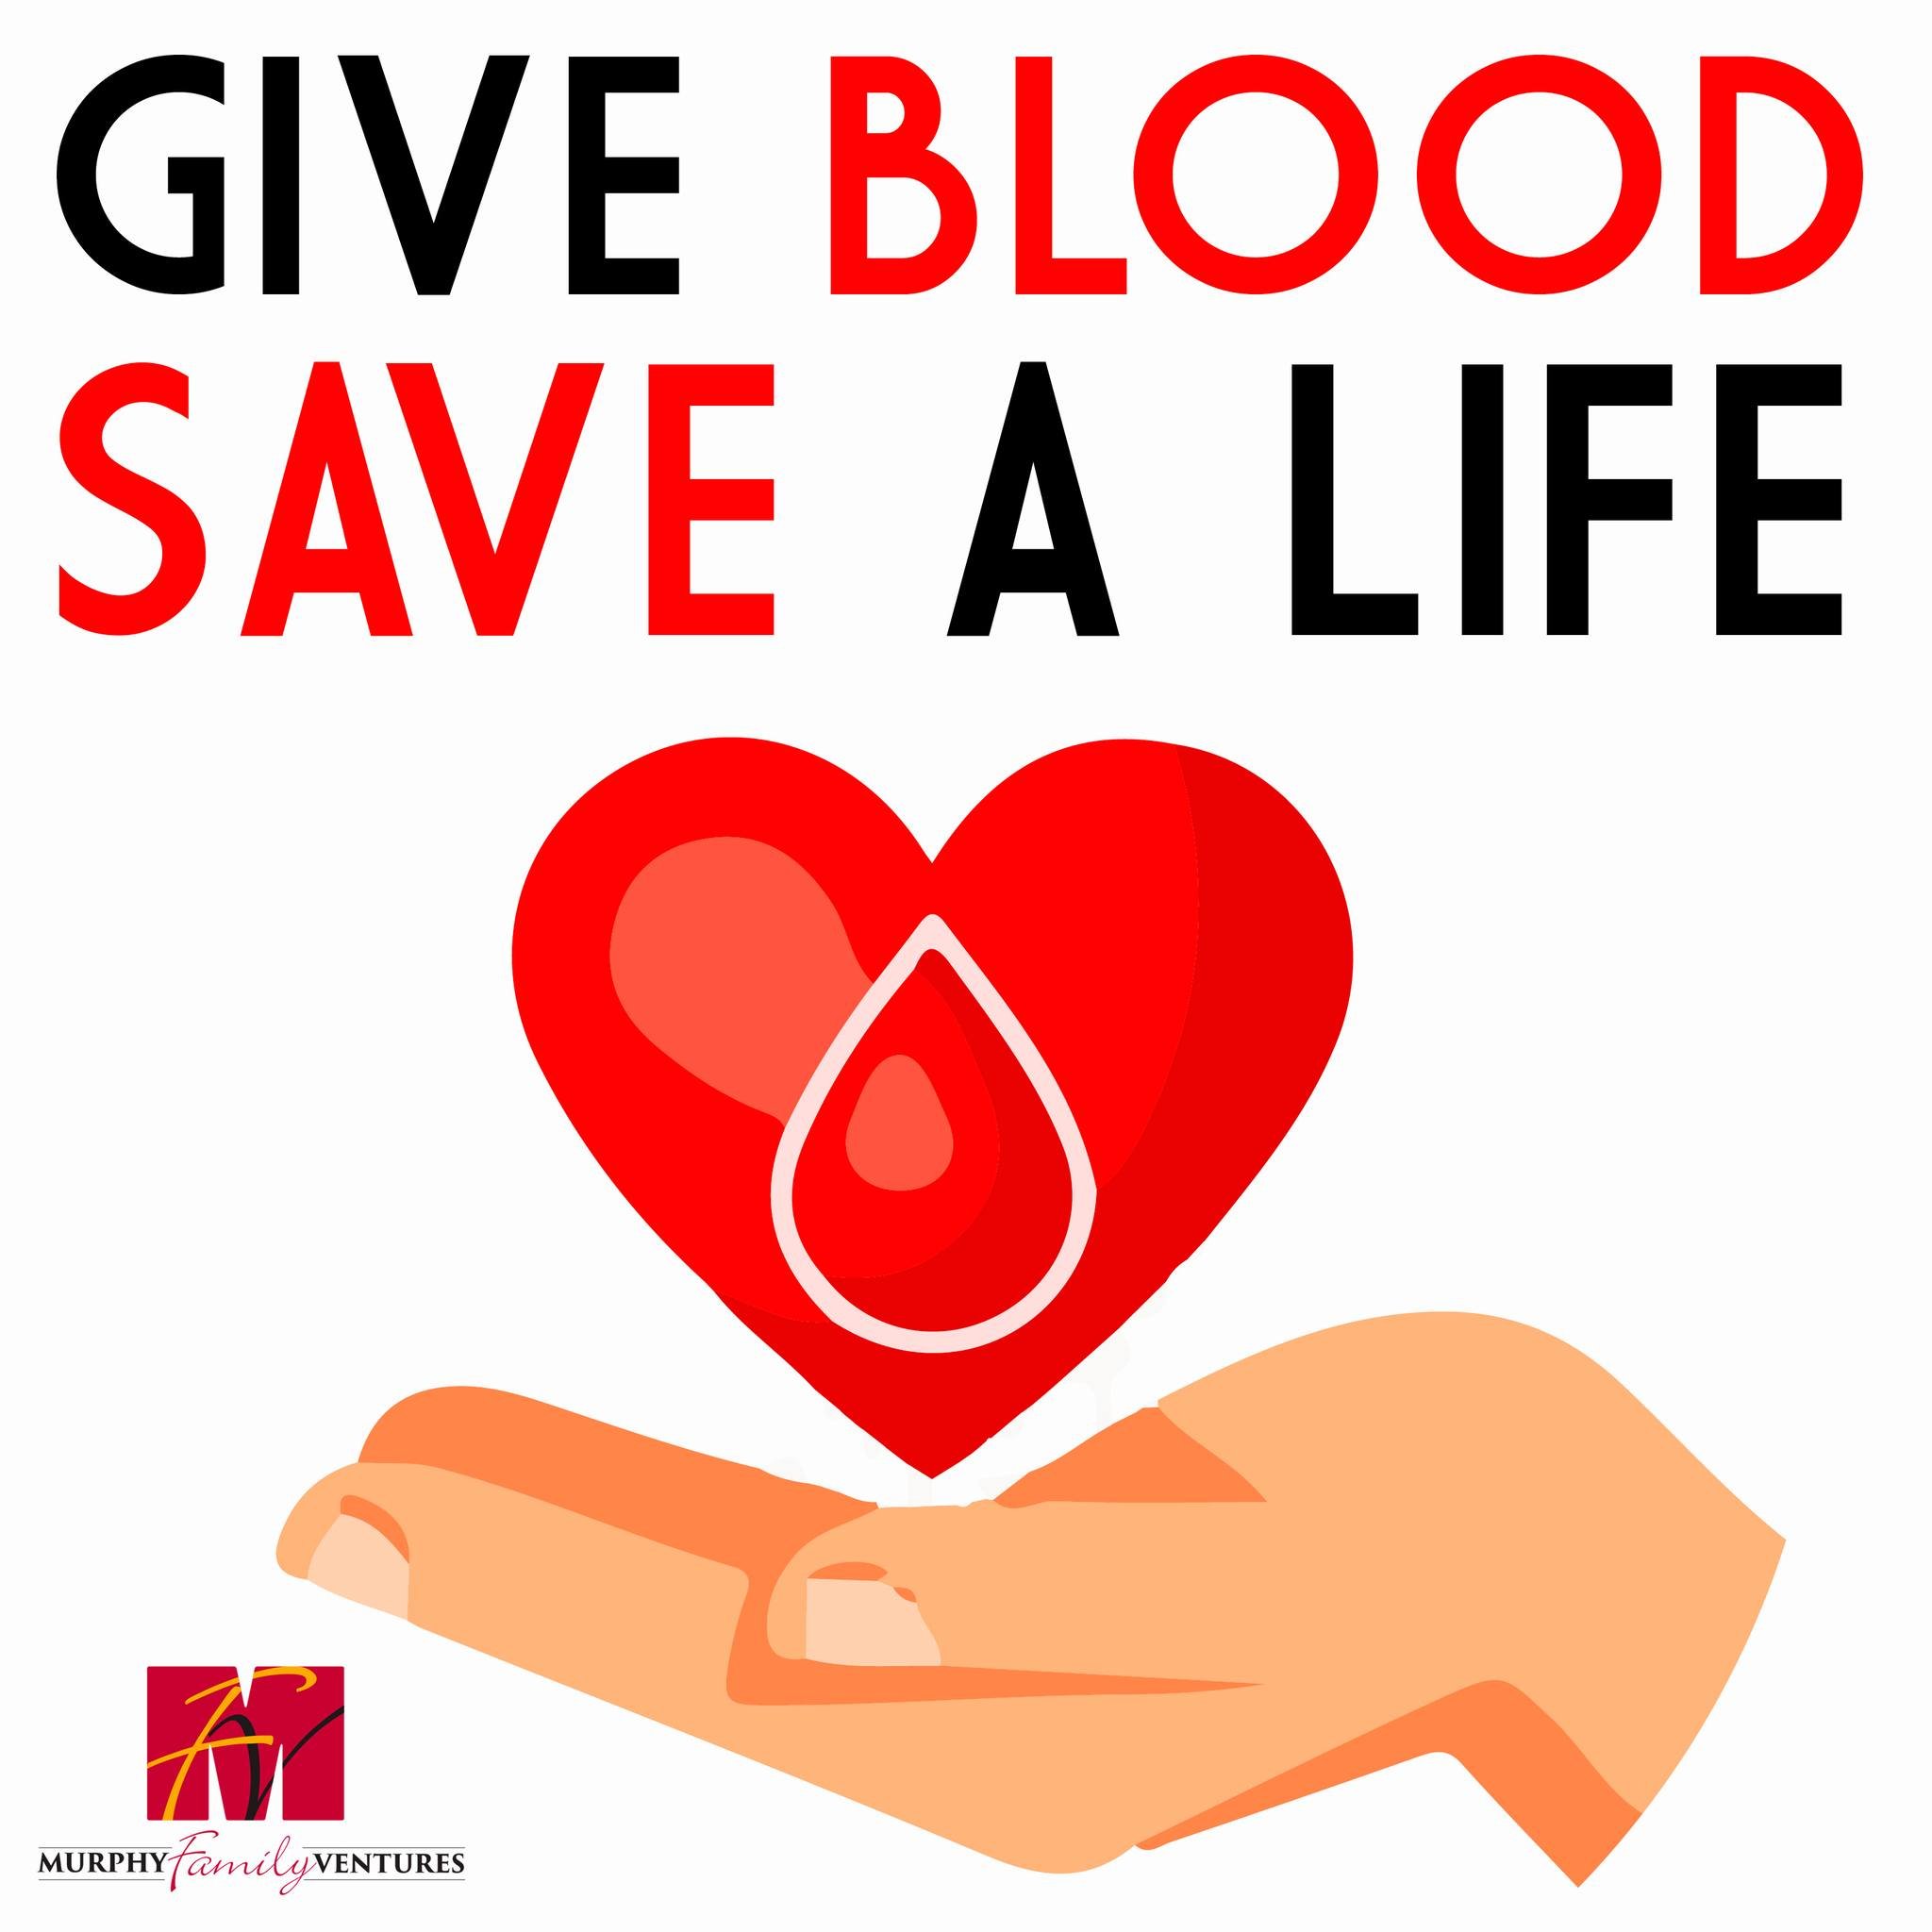 Don't forget to register for the blood drive coming up on June 6th from 10am - 2pm at the MFV Corporate Office in Wallace. Schedule an appointment today by visiting www.redcrossblood.org or calling 1-800-RED-CROSS. Use sponsor code &quot;Murphy Famil